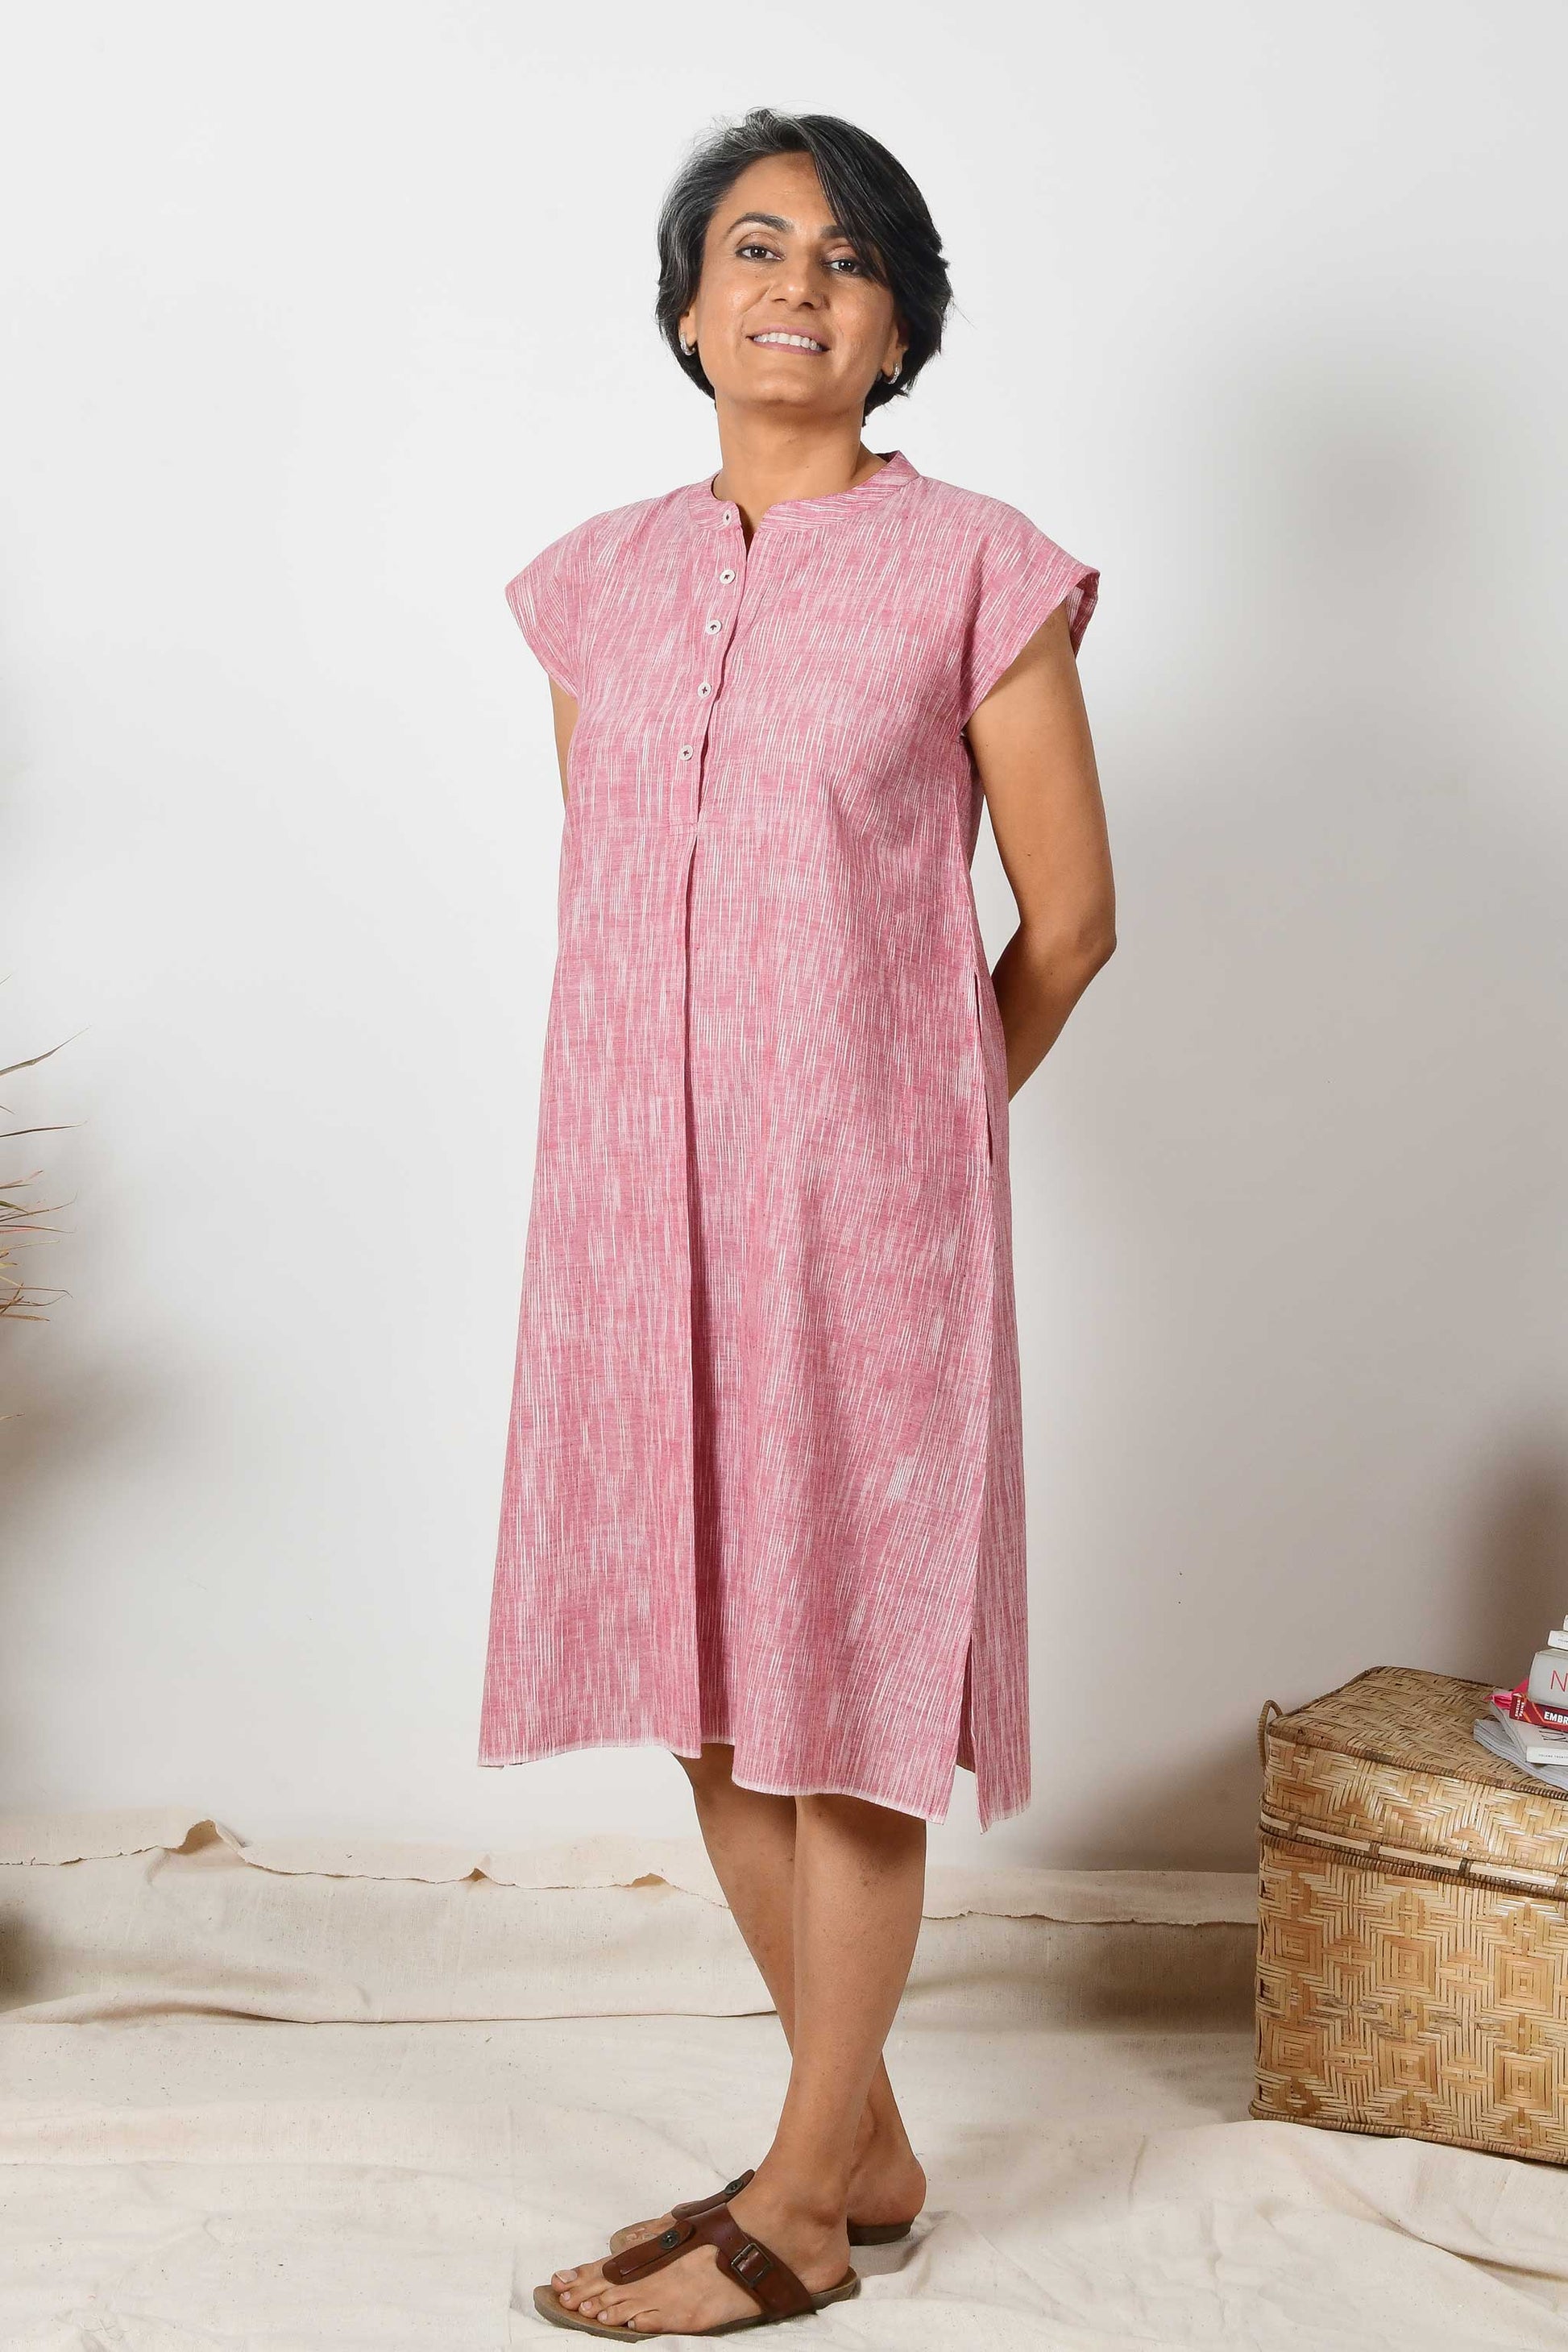 A smiling Indian woman wearing a short sleeved brick red cotton midi dress made with hand spun and hand woven natural fabric.